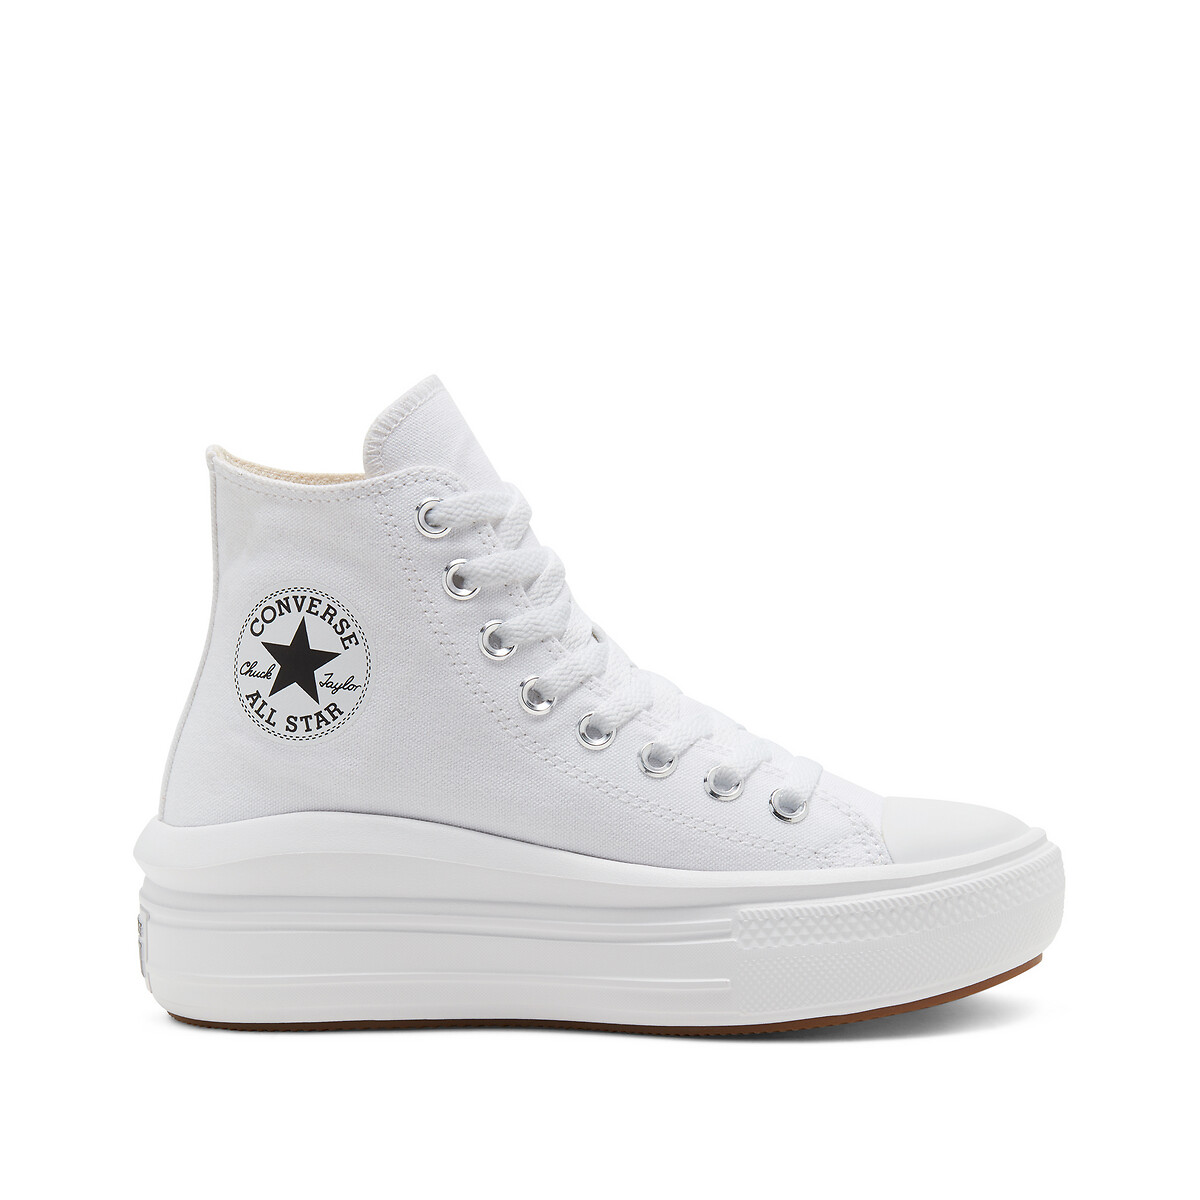 Chuck taylor all star apple store n z